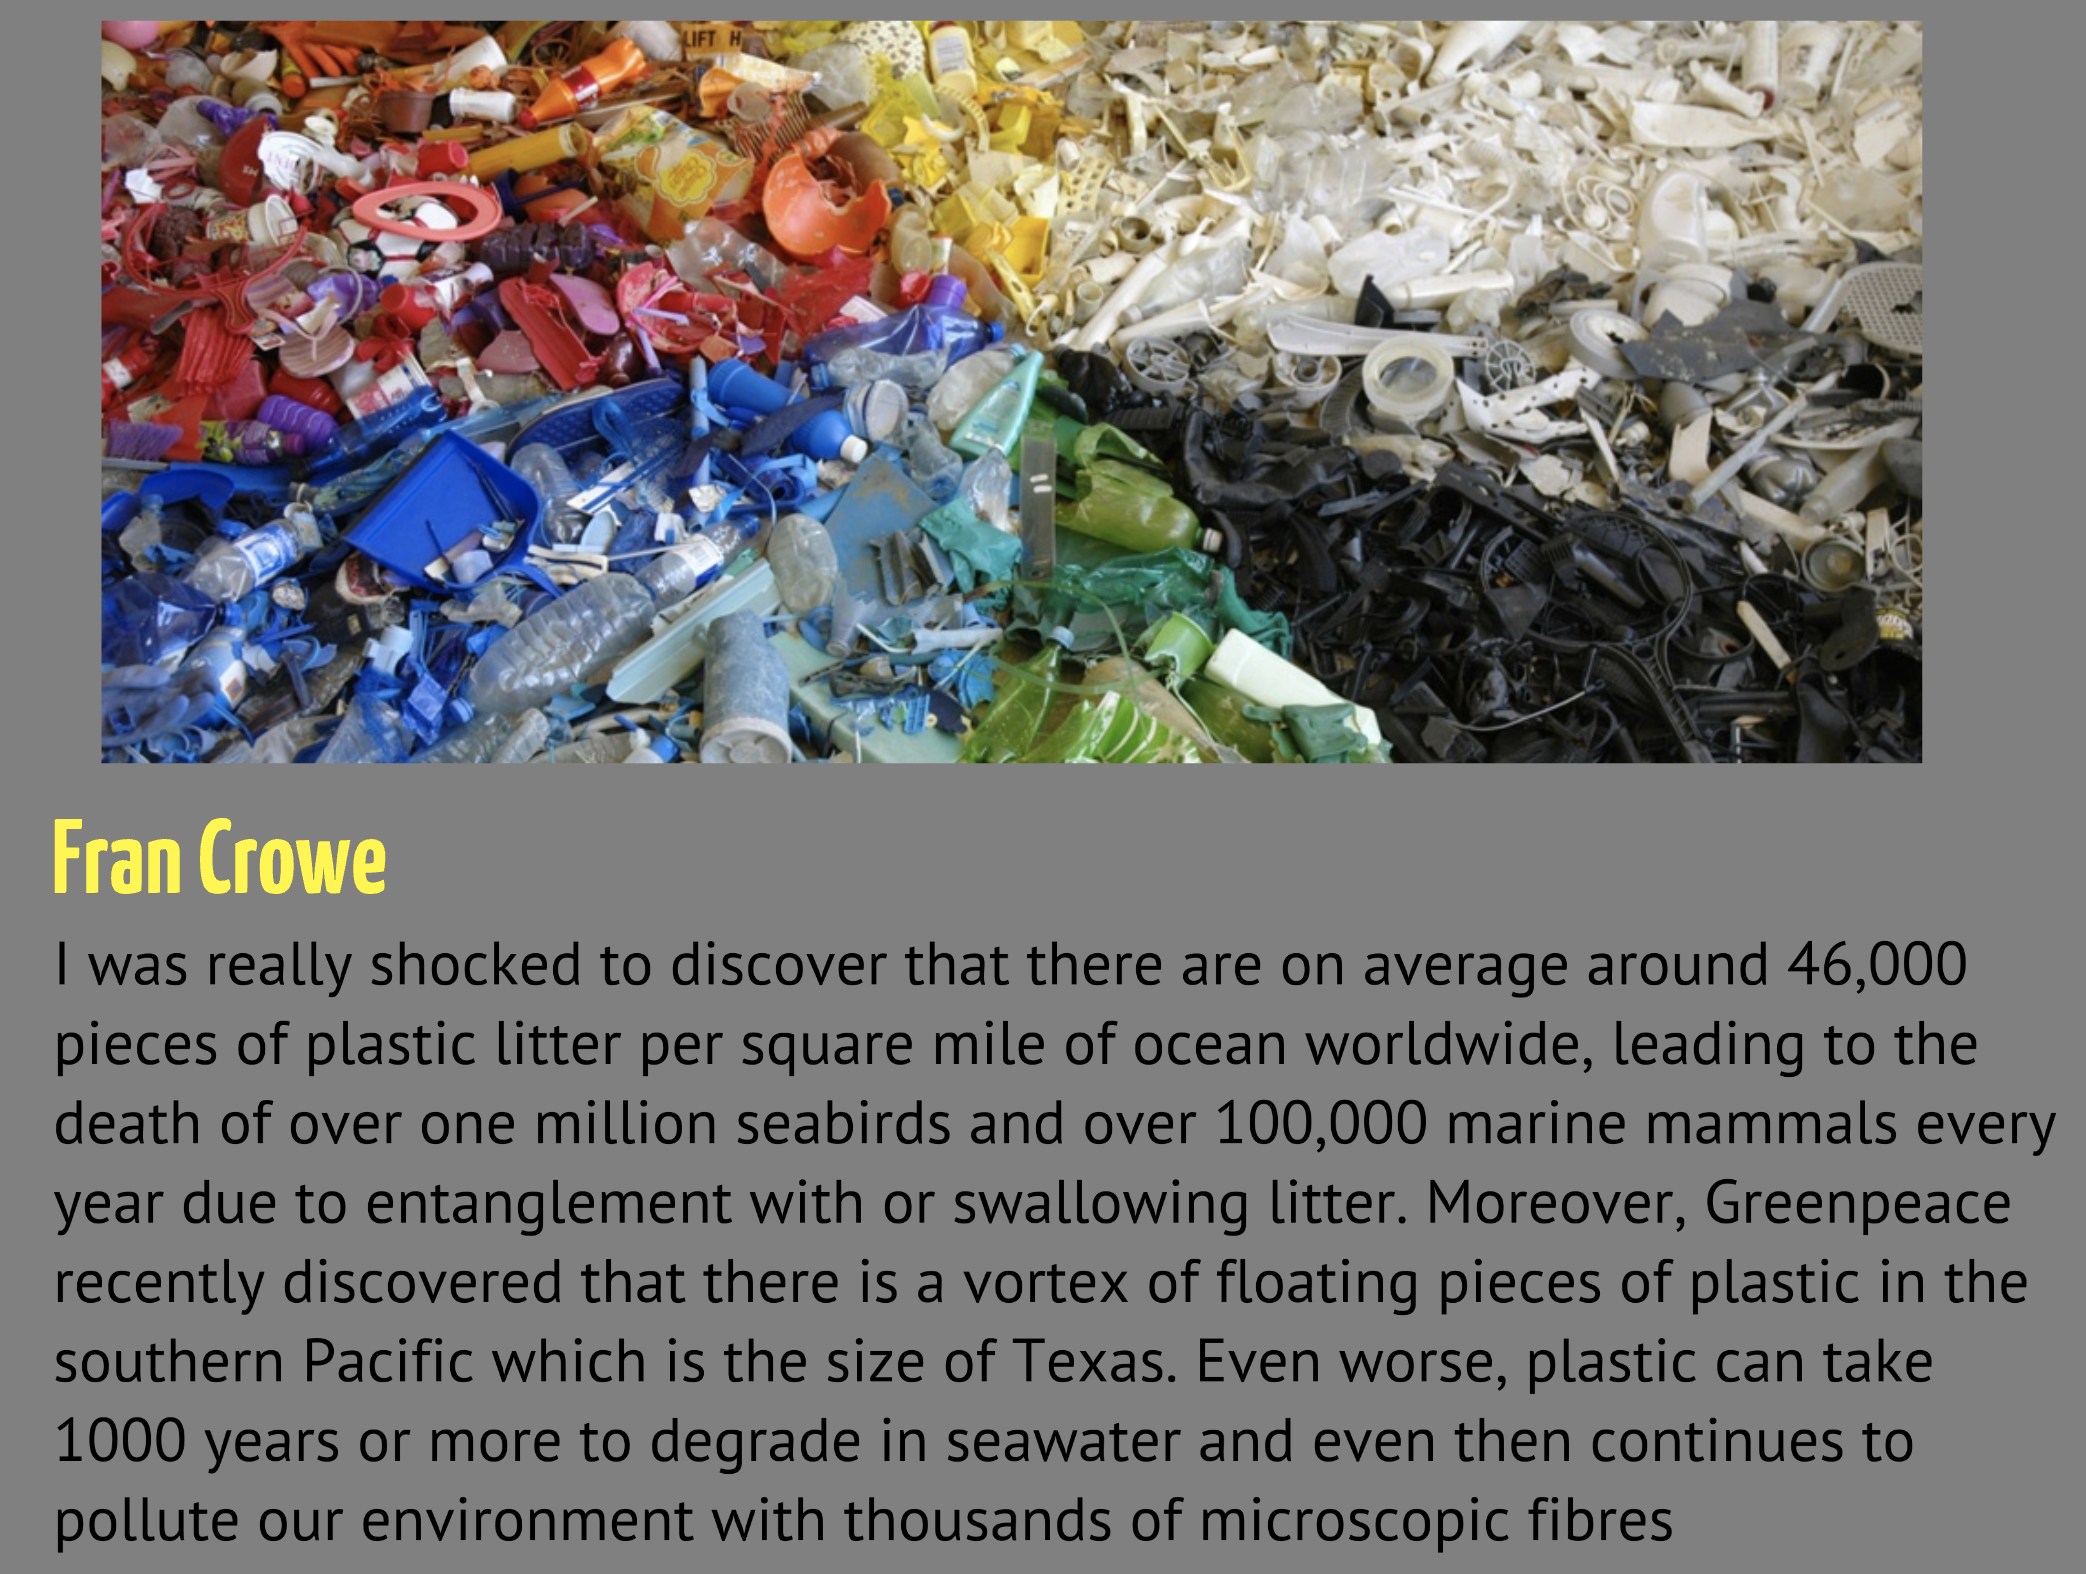 image of found garbage sorted by color